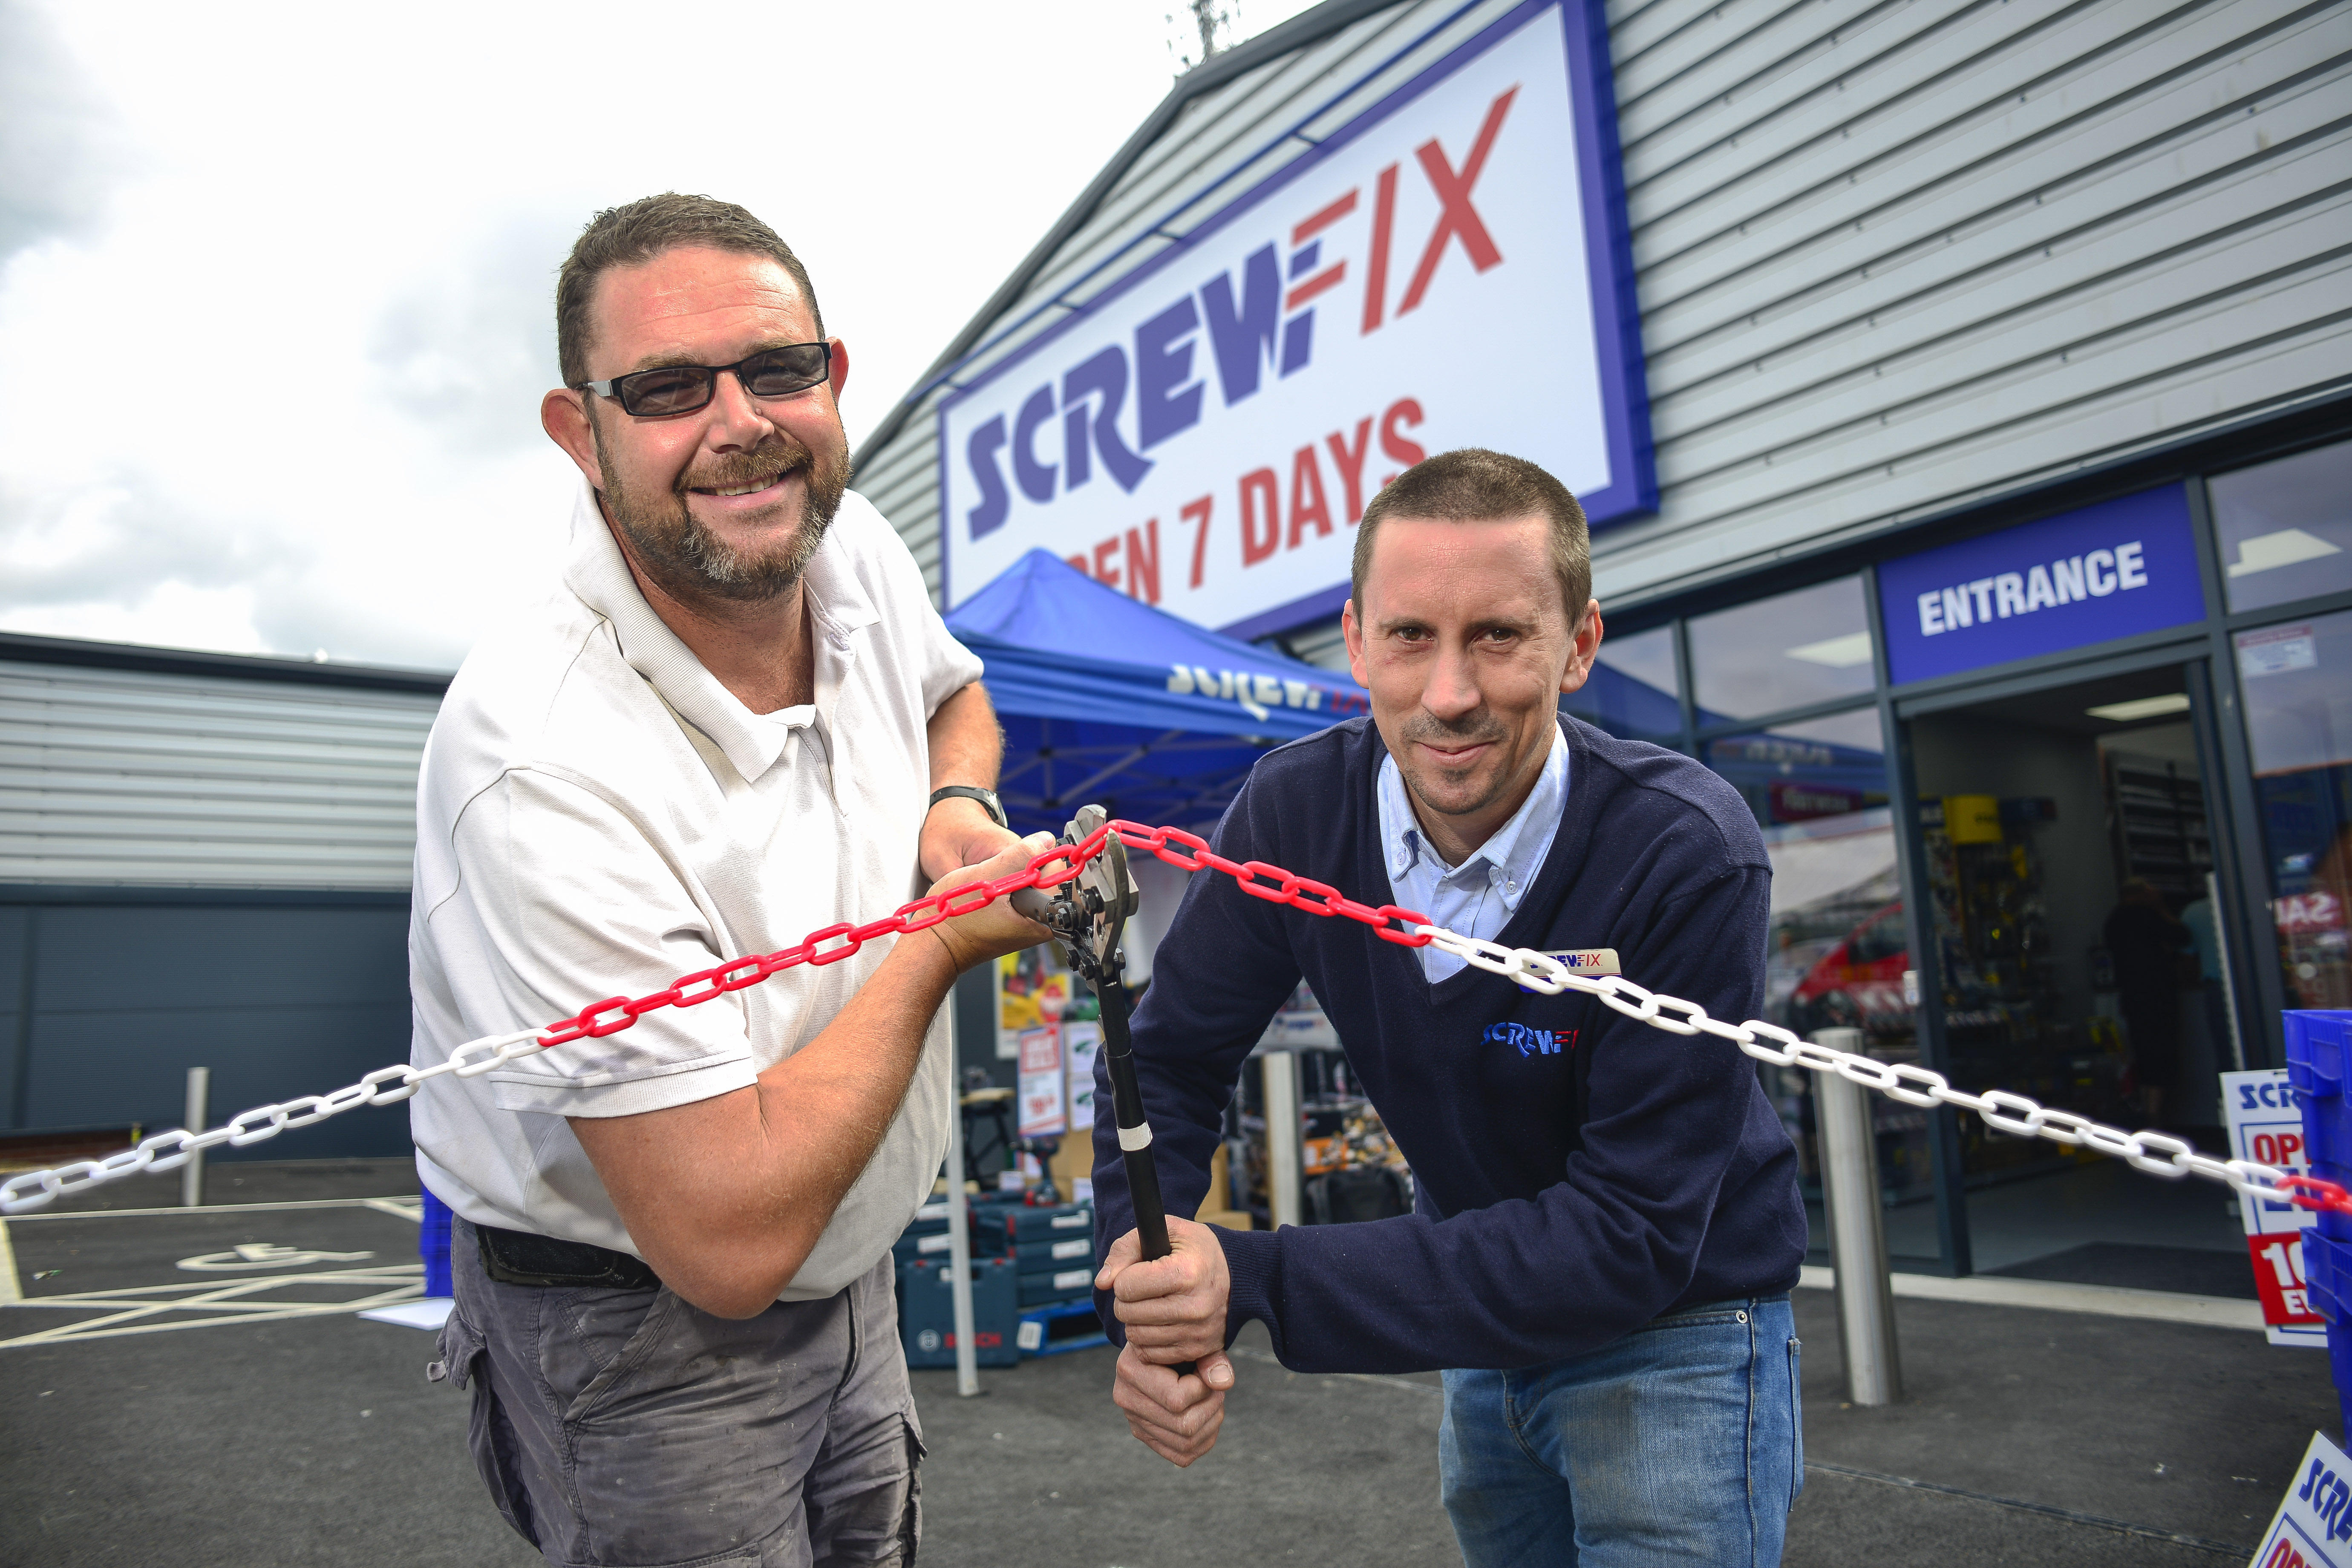 Clacton-on-Sea’s first Screwfix store is declared a runaway success